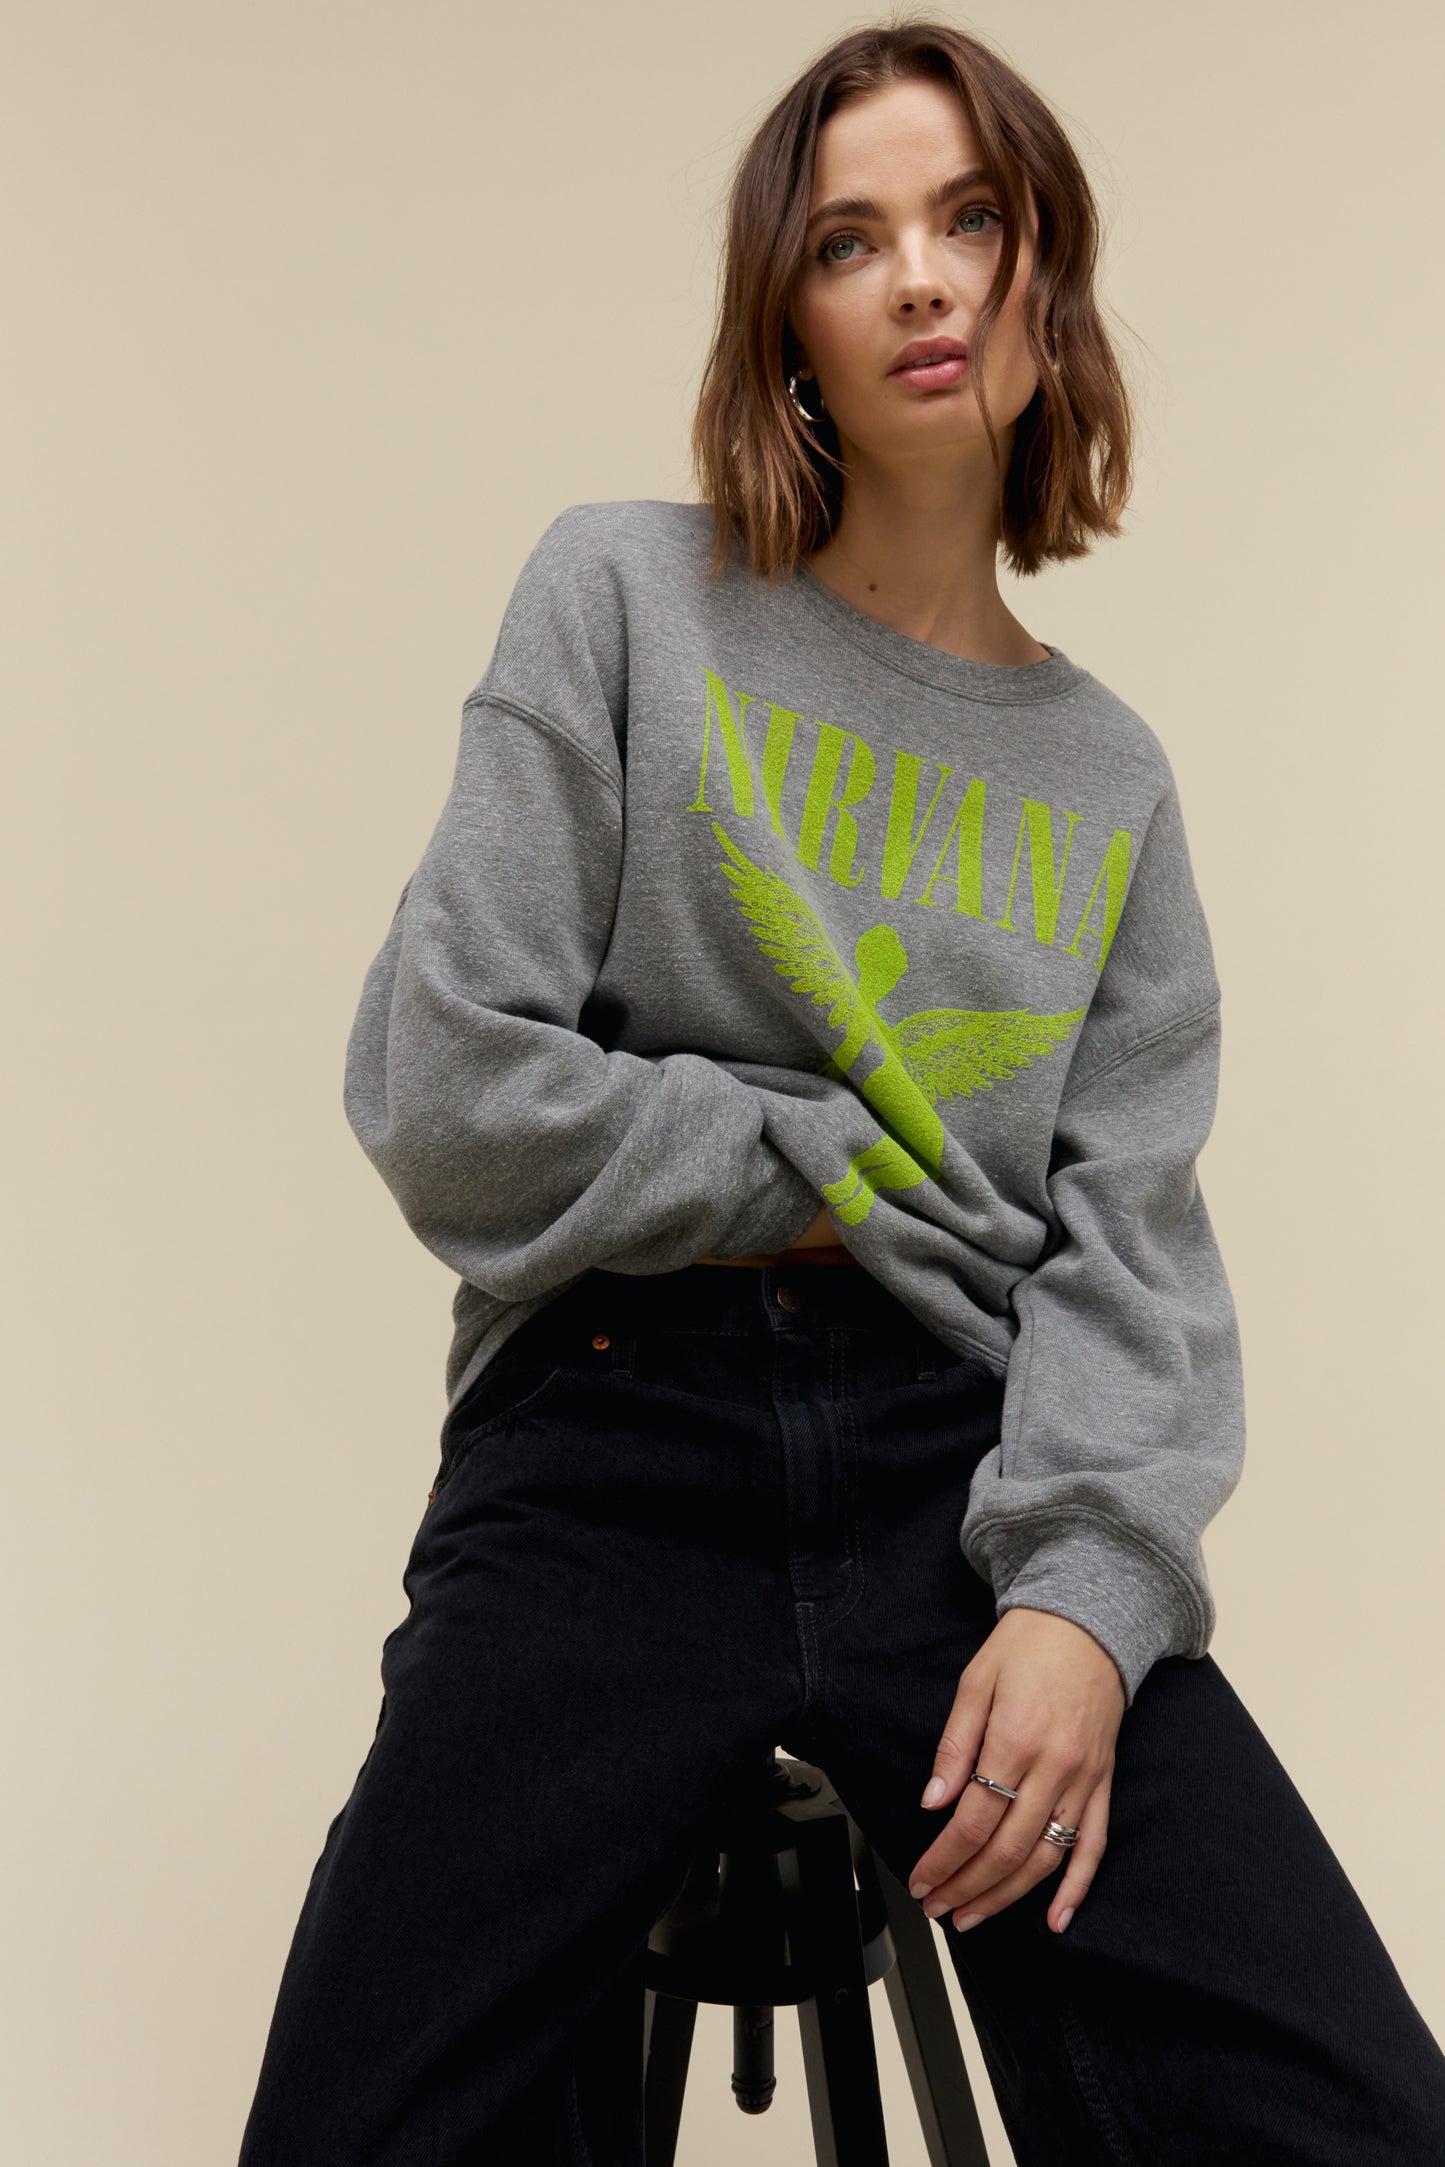 Model wearing an oversized tri-blend fleece sweatshirt with Nirvana 'In Utero' graphics stamped on the front and back